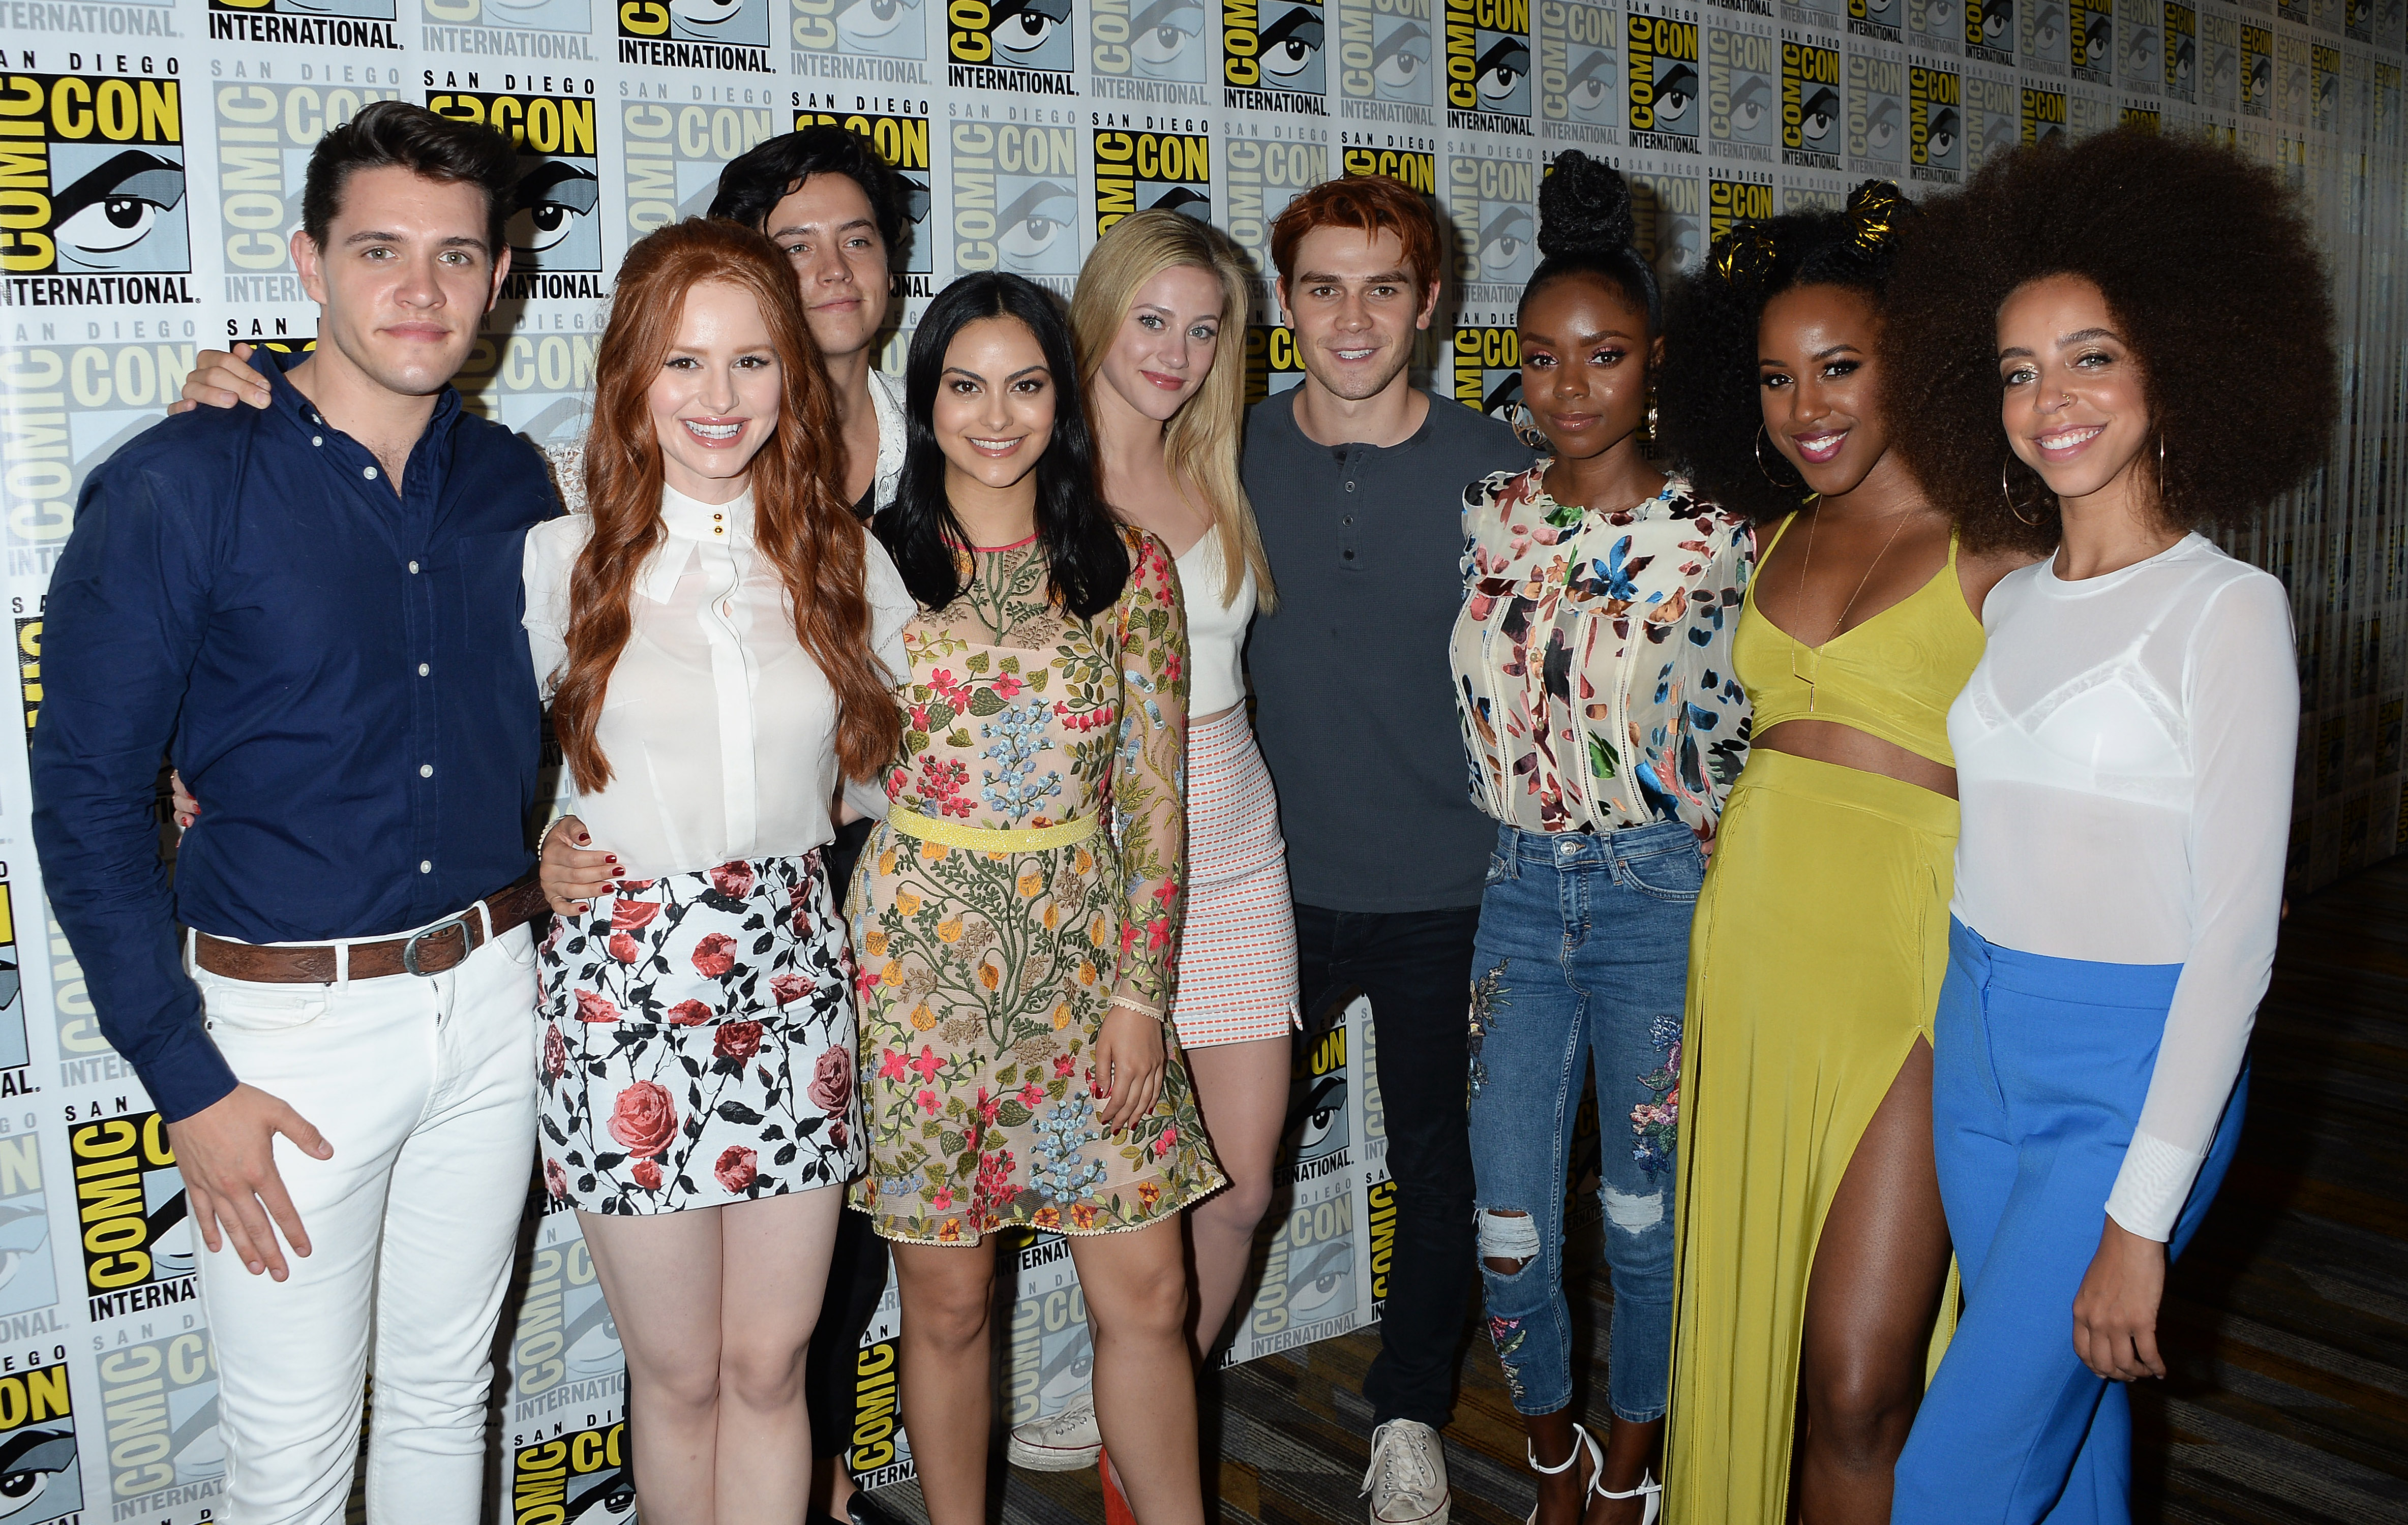 The Cast of 'Riverdale' Brings to Life Some Internet Memes